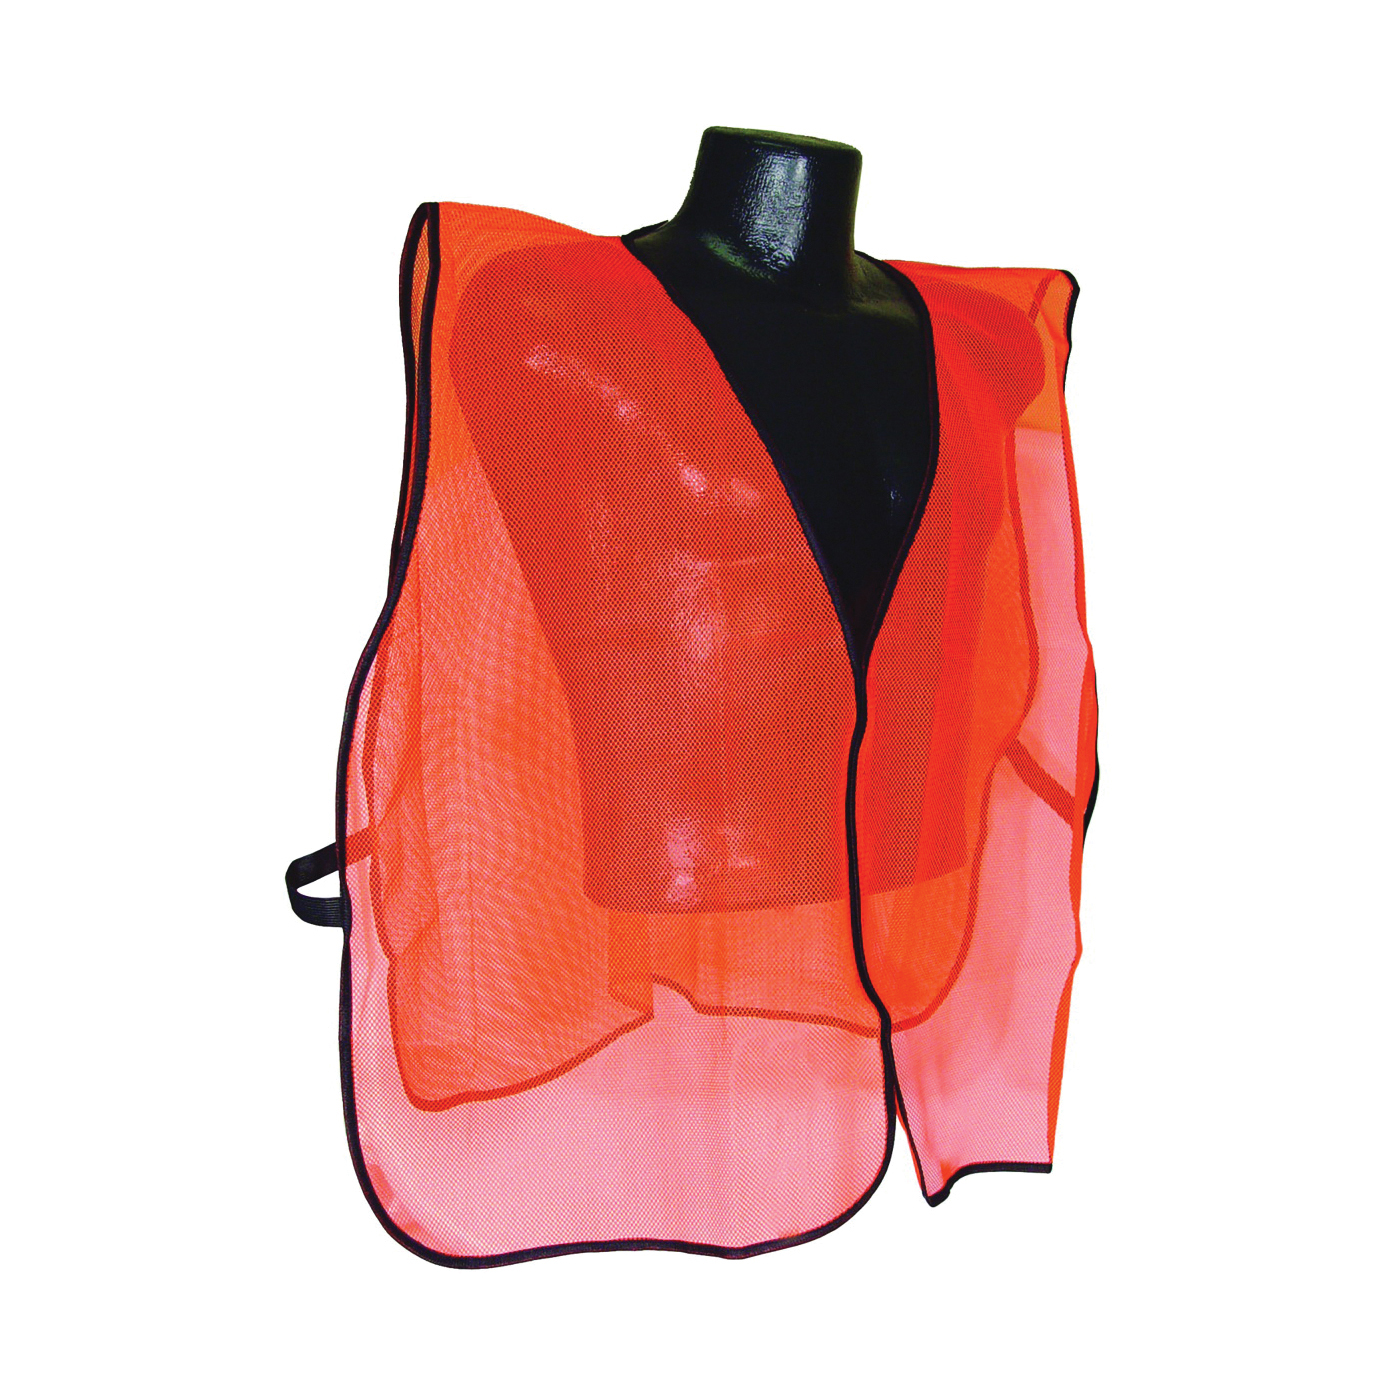 SVO Non-Rated Safety Vest, One-Size, Polyester, Green/Orange/Silver, Hook-and-Loop Closure